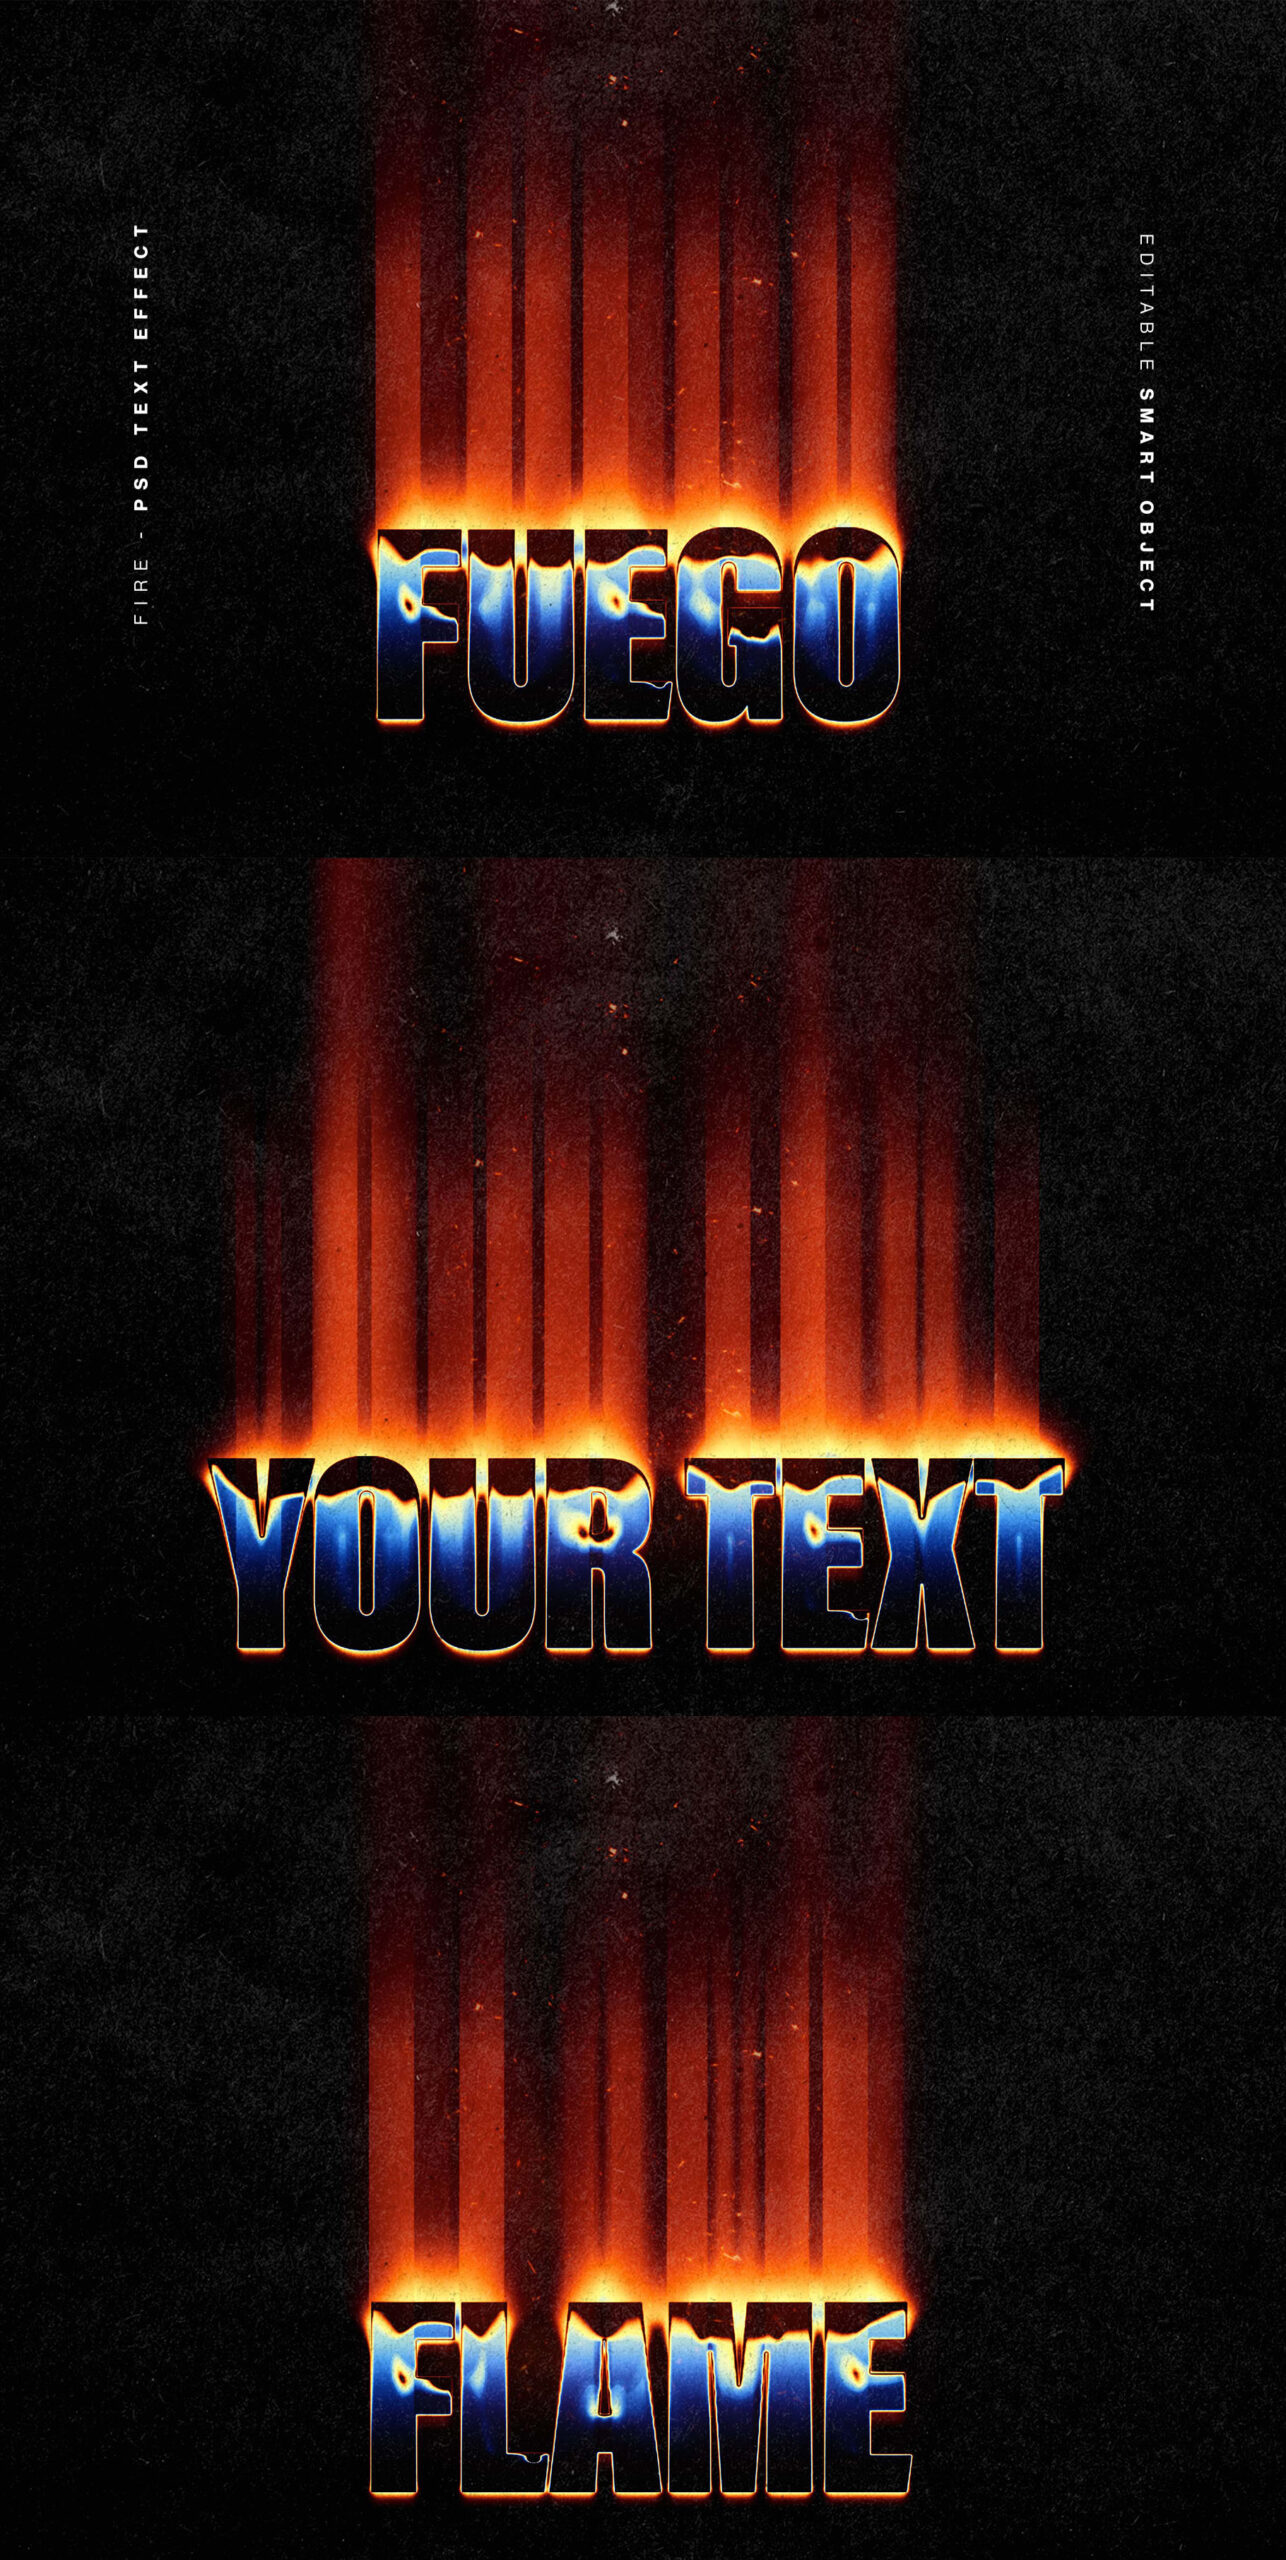 Fuego Retro Text Effect in PSD format